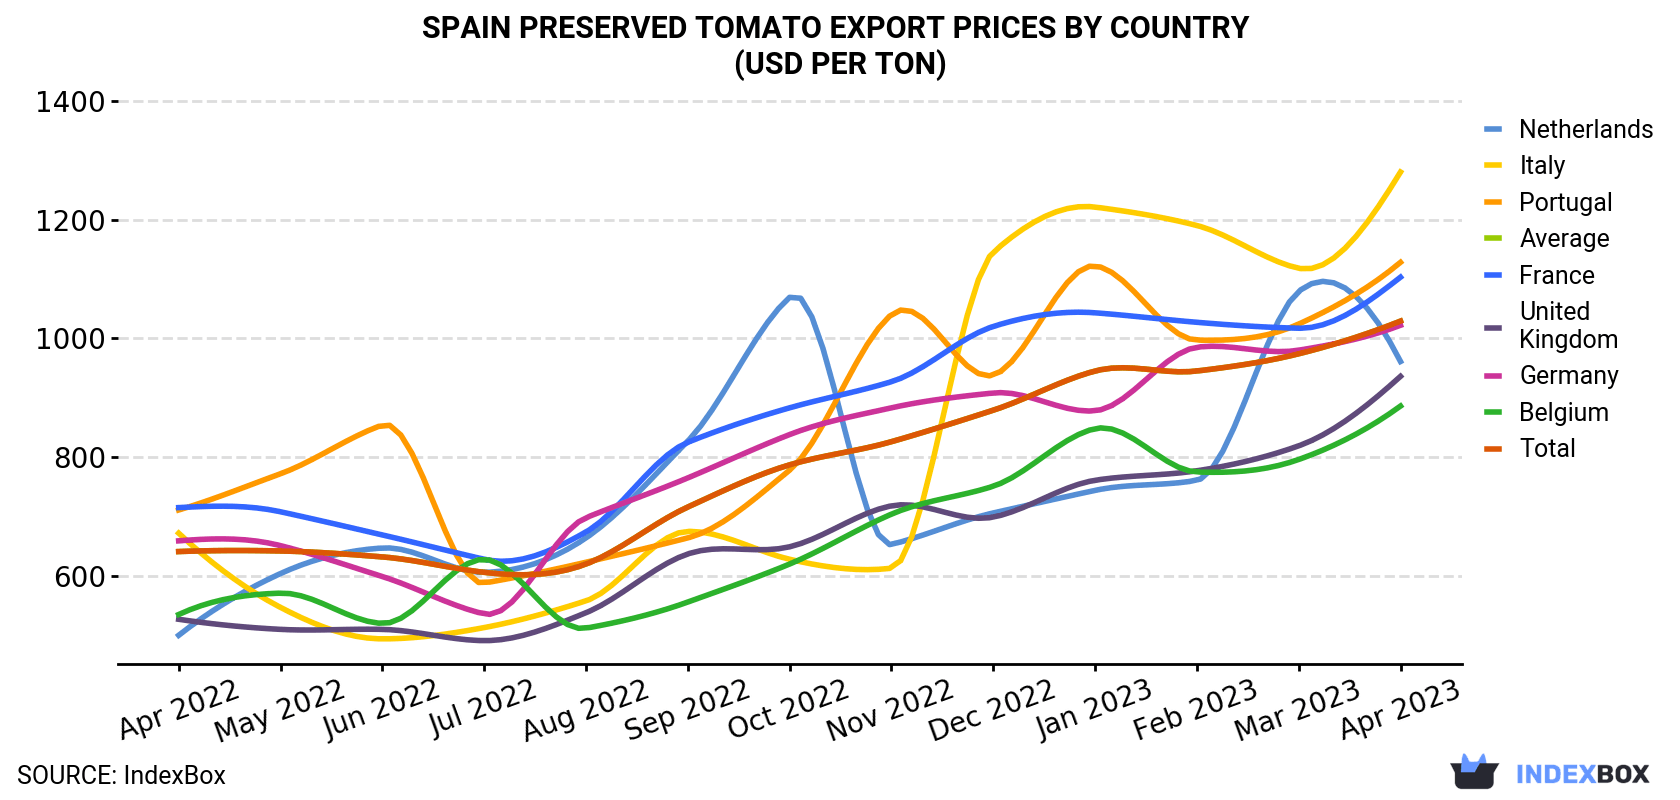 Spain Preserved Tomato Export Prices By Country (USD Per Ton)